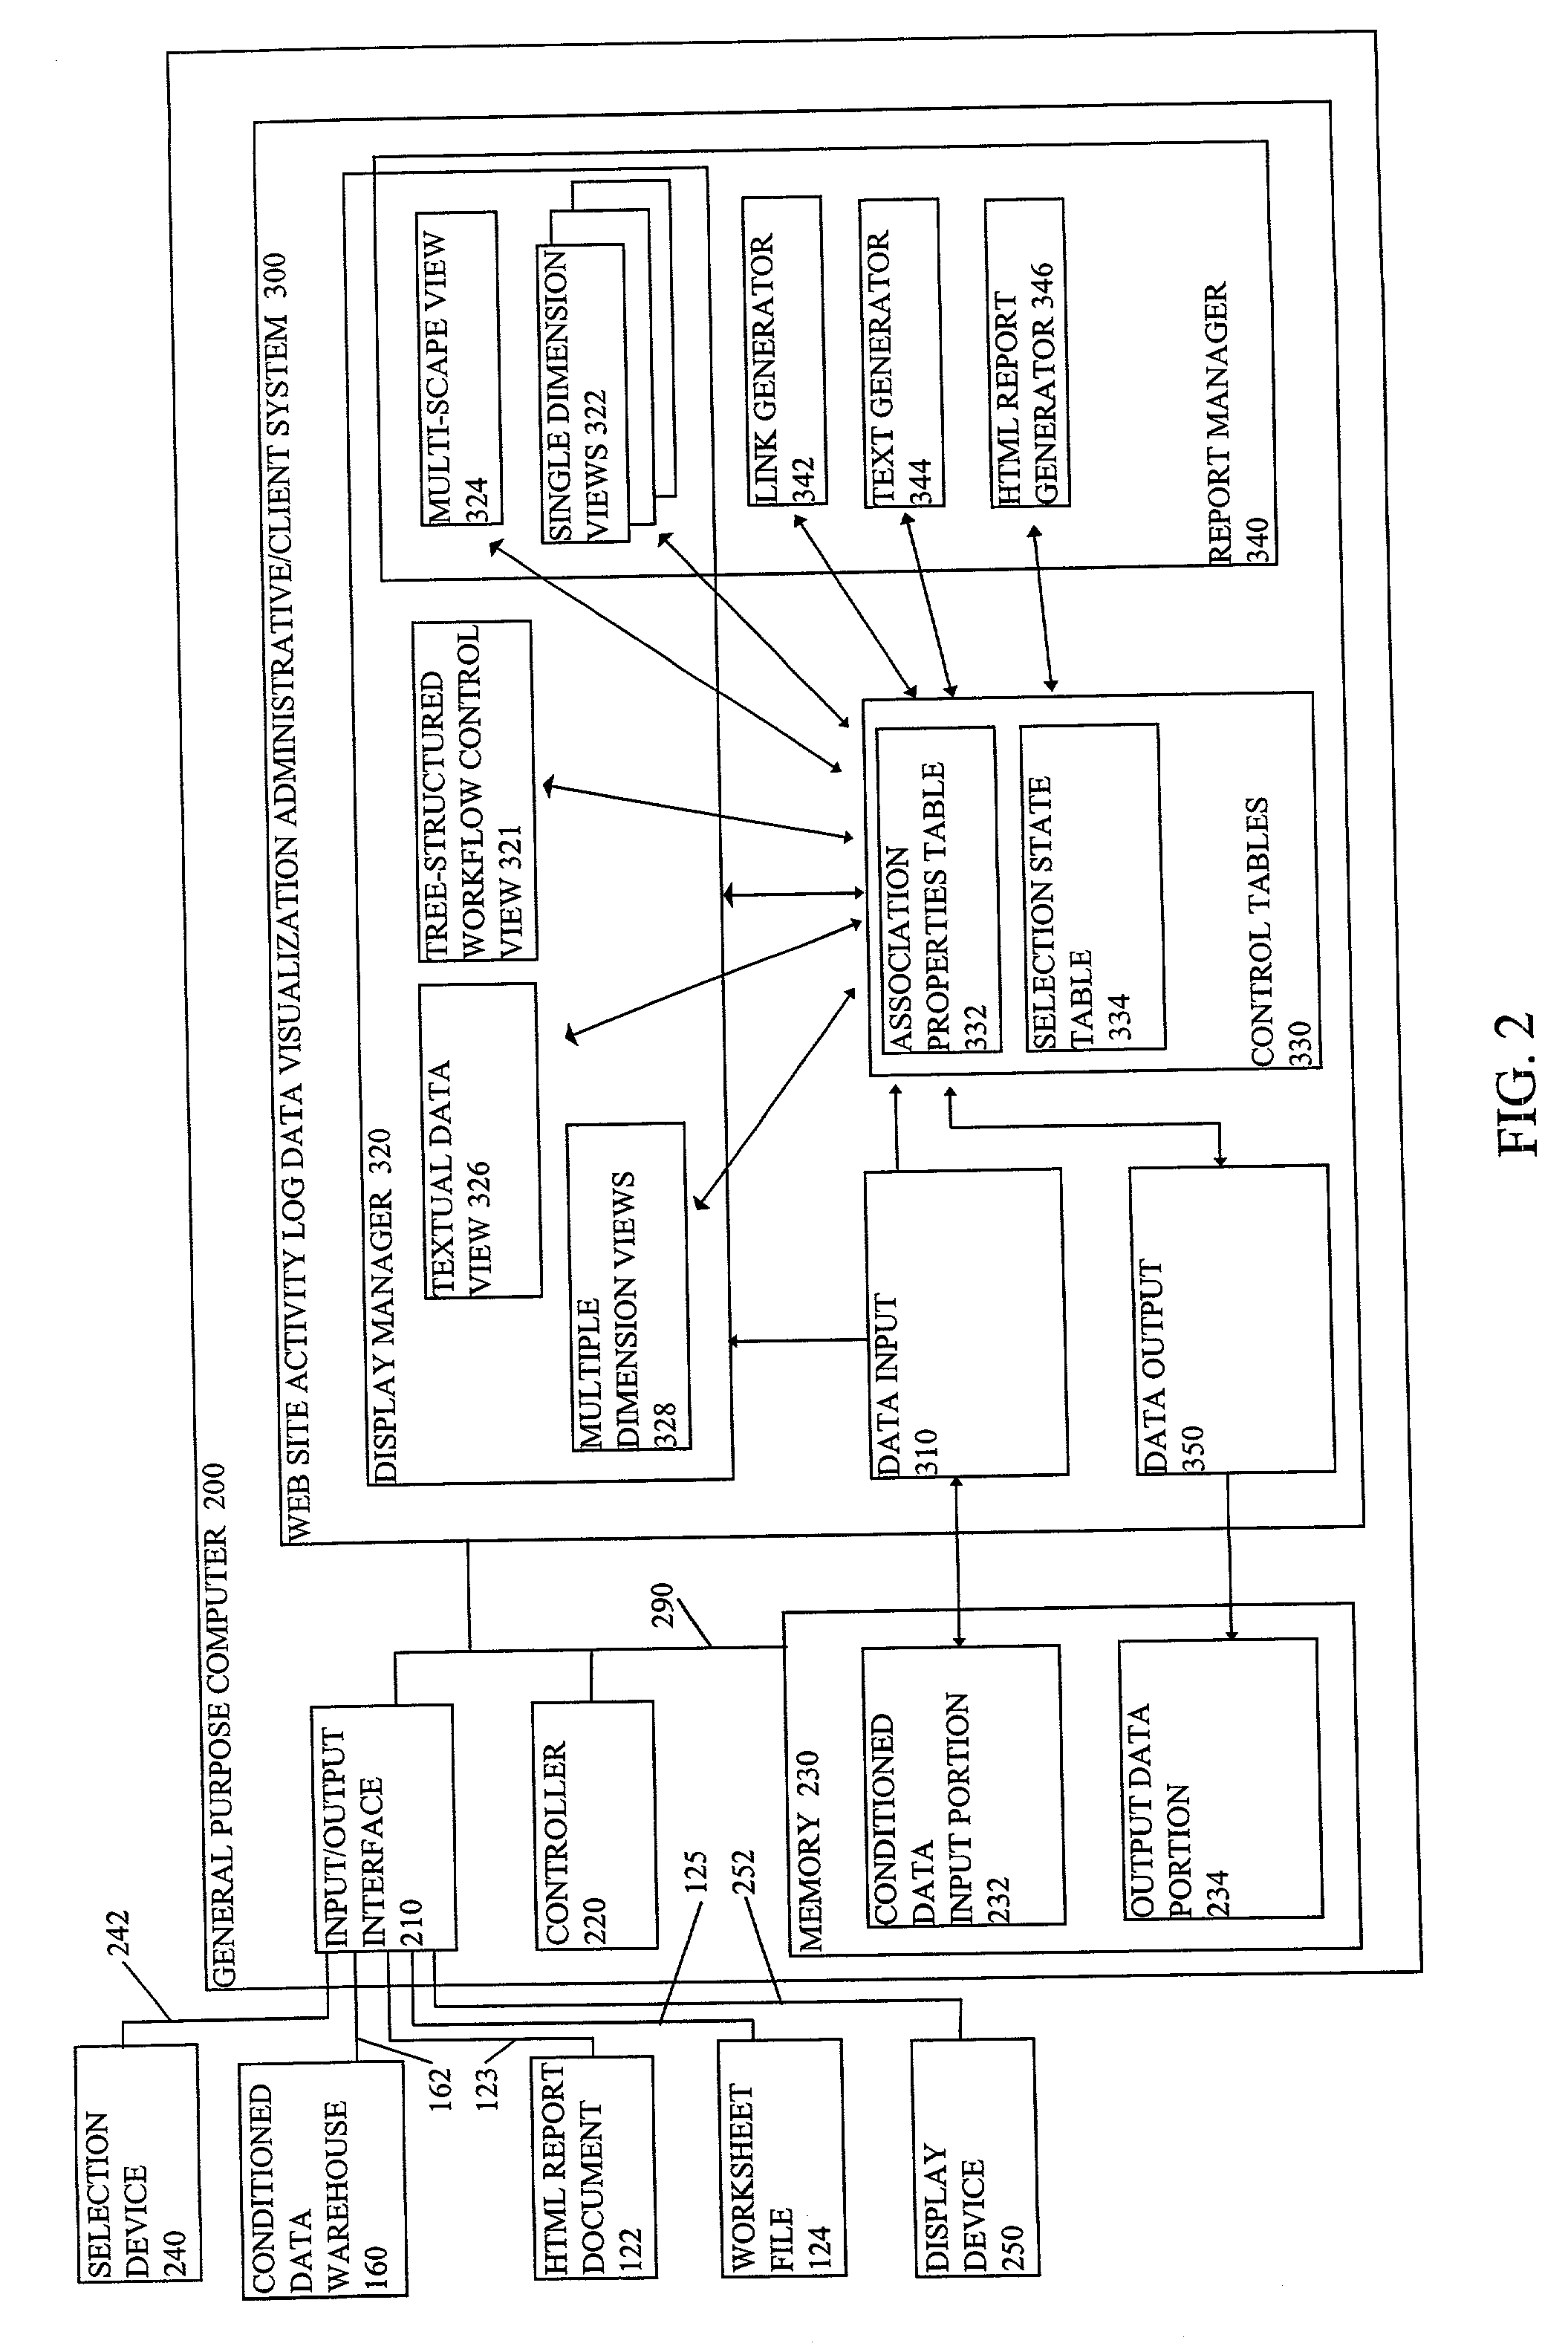 Systems and methods for visualizing and analyzing conditioned data